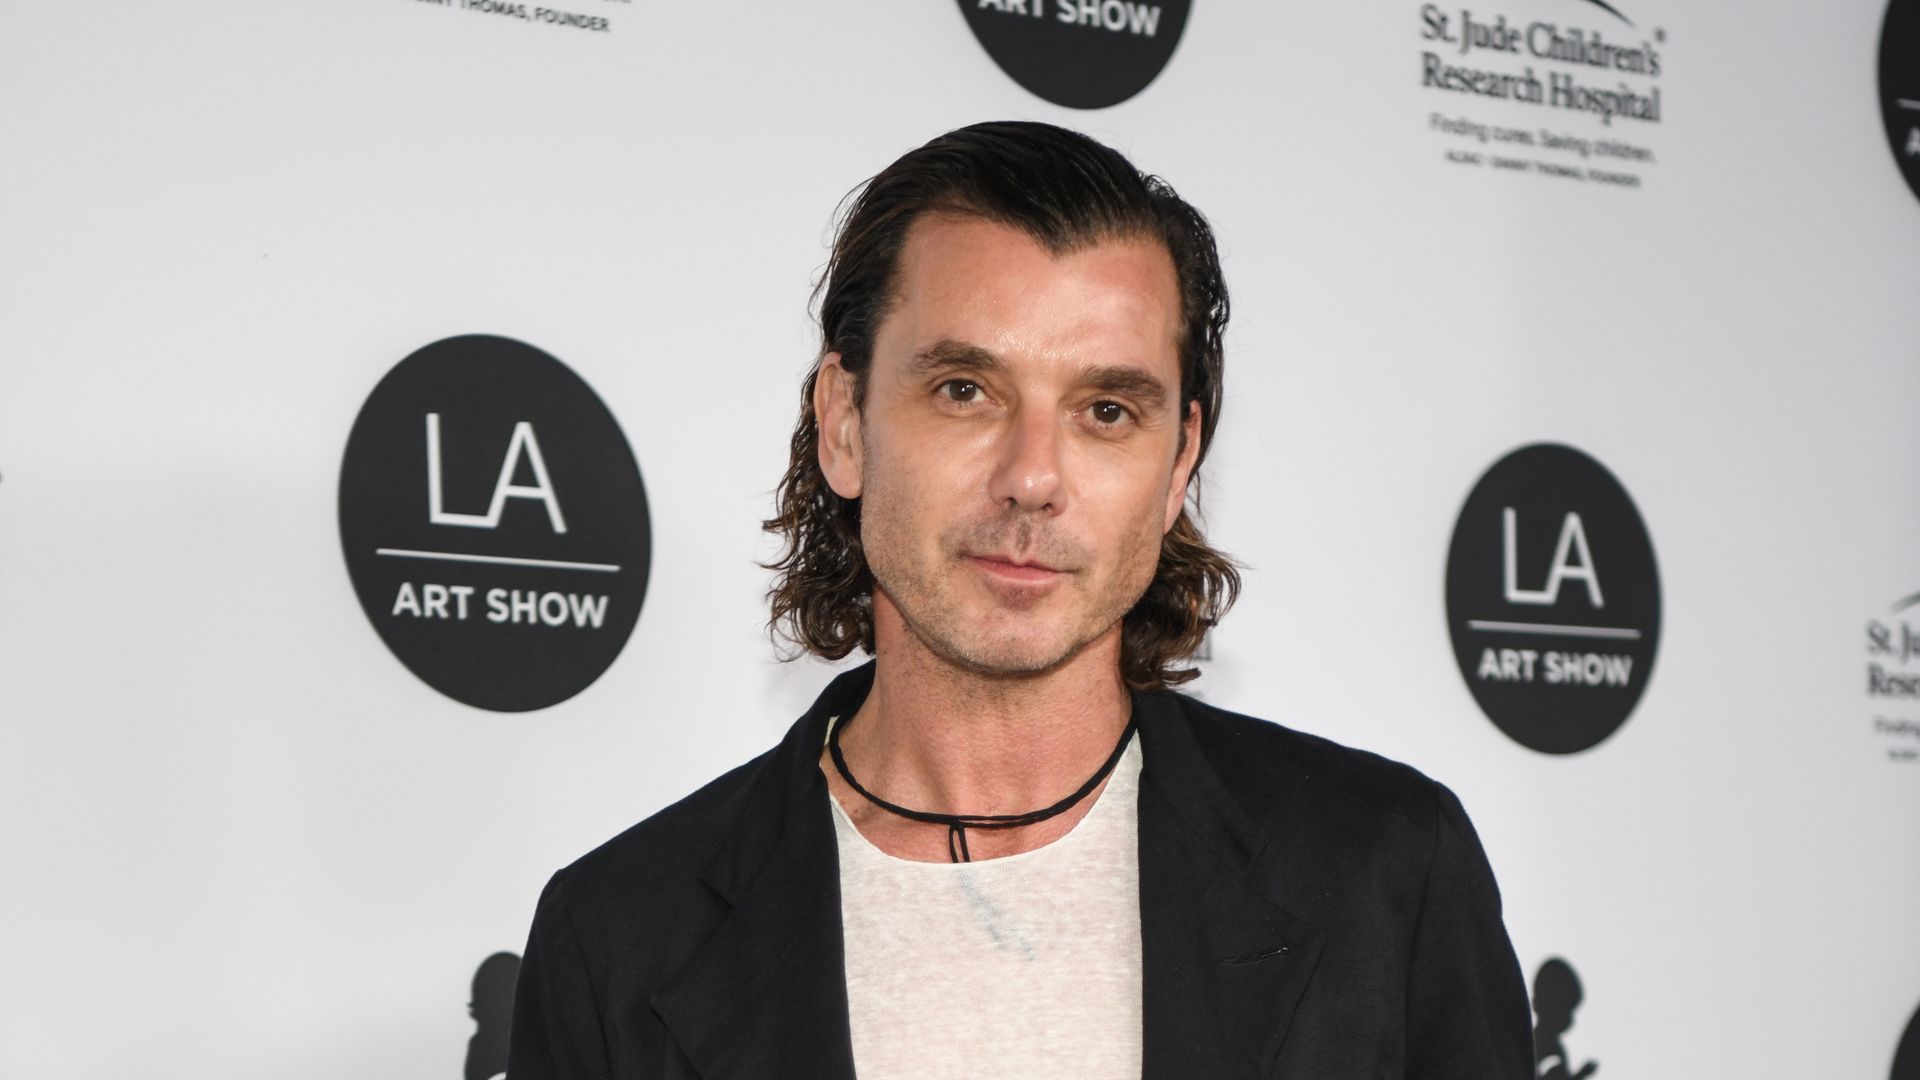 Gavin Rossdale arrives at the LA Art Show 2019 Opening Night Gala at the Los Angeles Convention Center on January 23, 2019 in Los Angeles, California